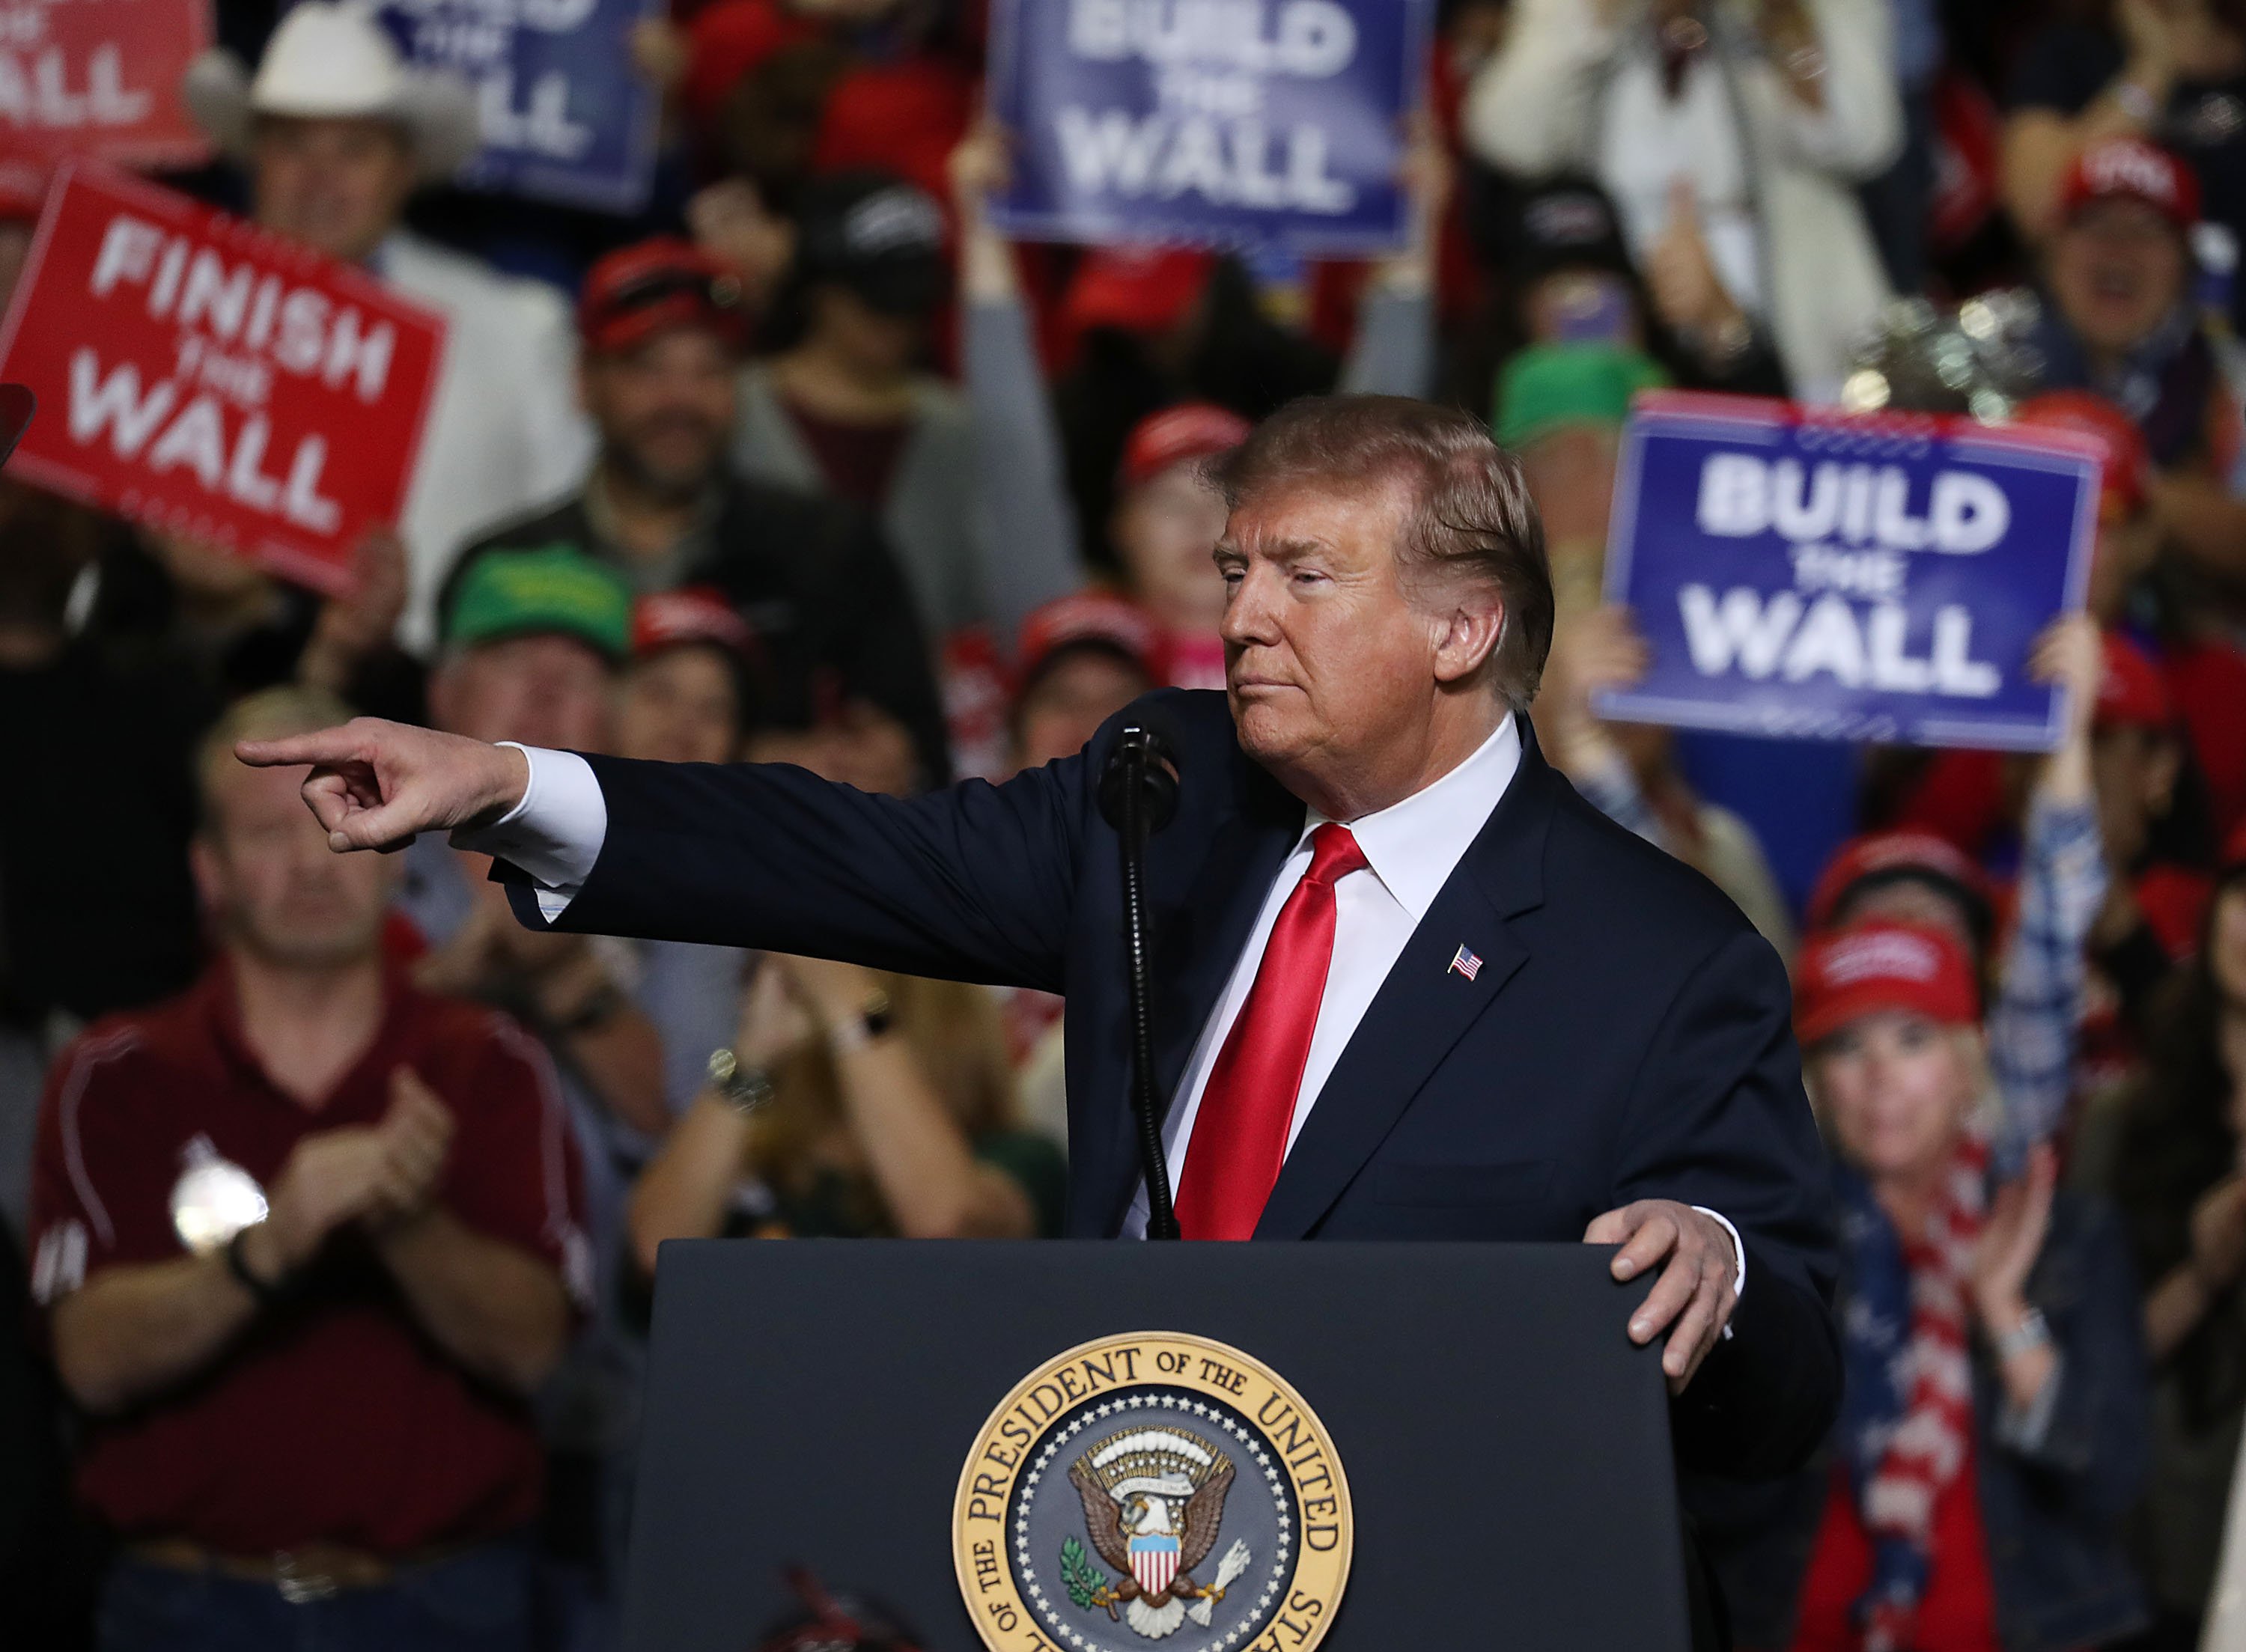 EL PASO, TEXAS - FEBRUARY 11: President Donald Trump speaks during a rally at the El Paso County Coliseum on February 11, 2019 in El Paso, Texas. U.S. President Donald Trump continues his campaign for a wall to be built along the border as the Democrats in Congress are asking for other border security measures. (Photo by Joe Raedle/Getty Images)